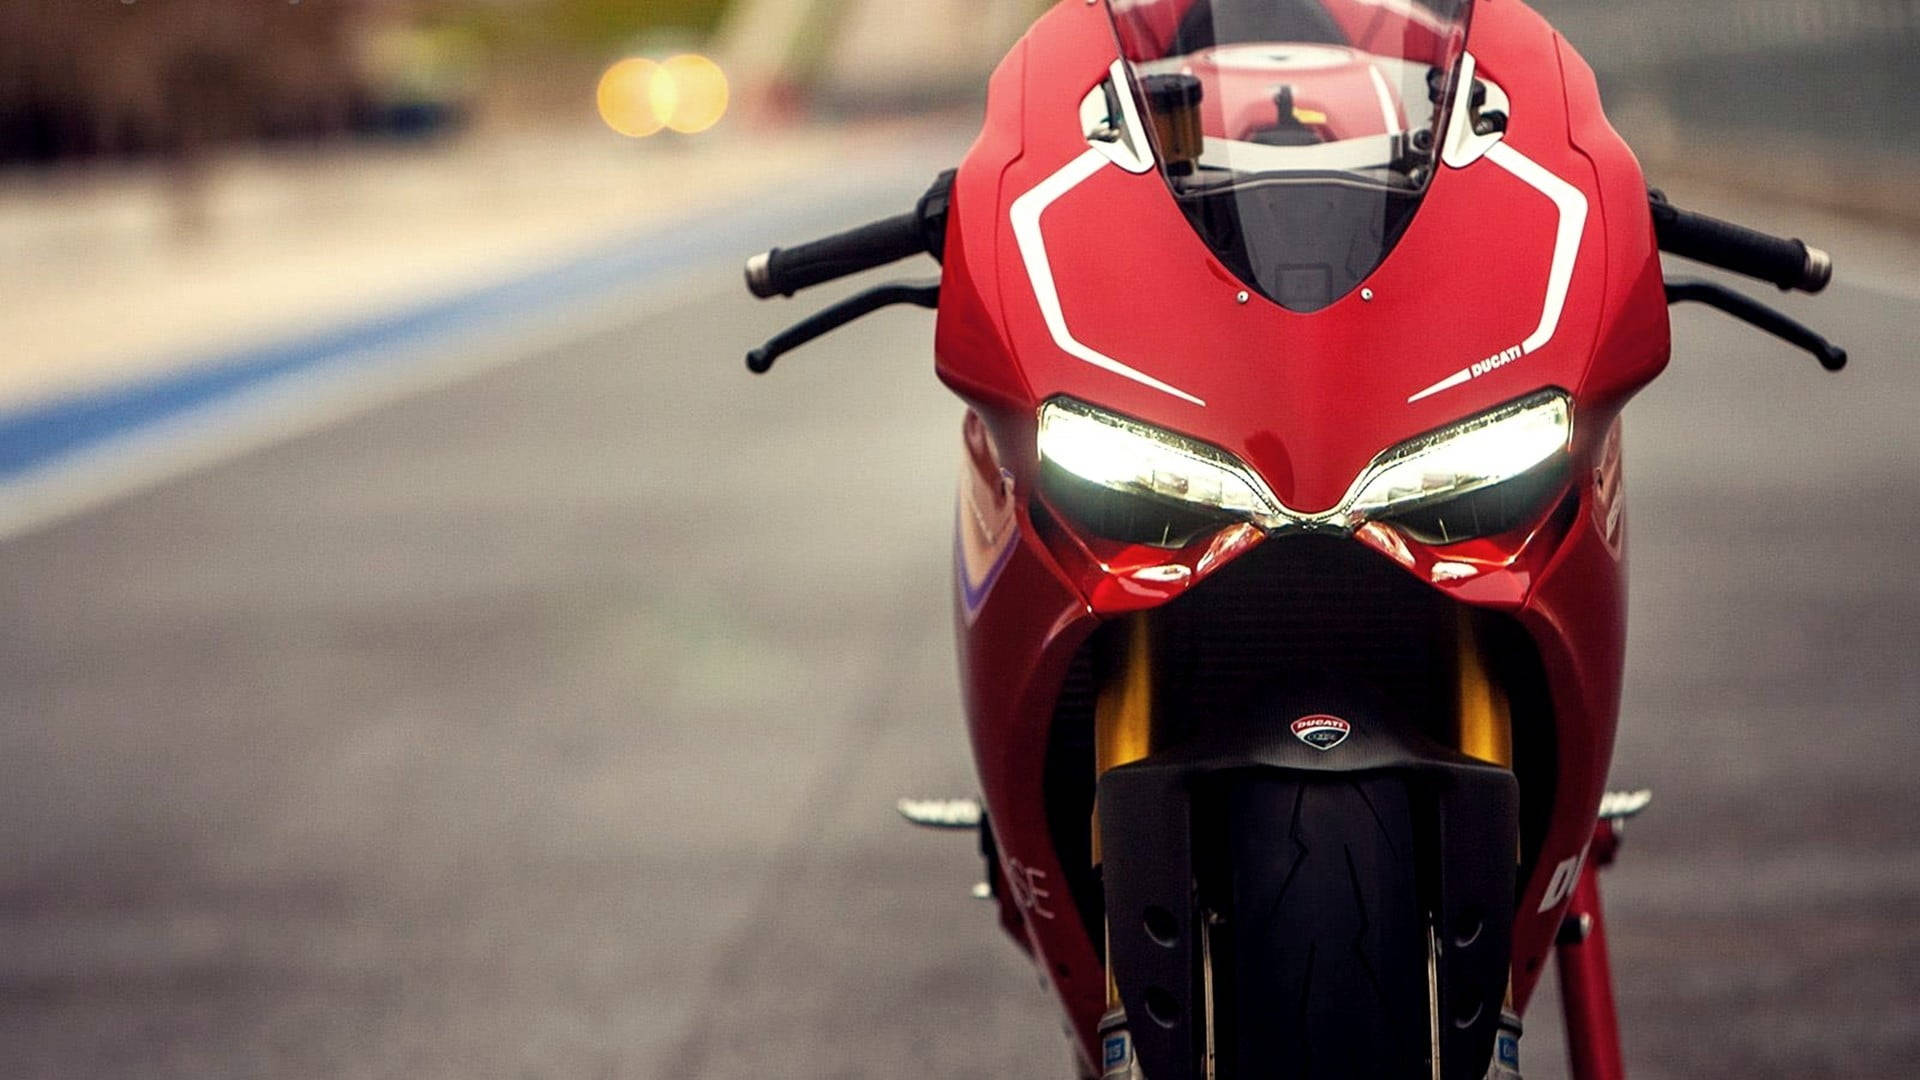 Blaze Through The Air With The Ducati 1199 Panigale R Superbike Background